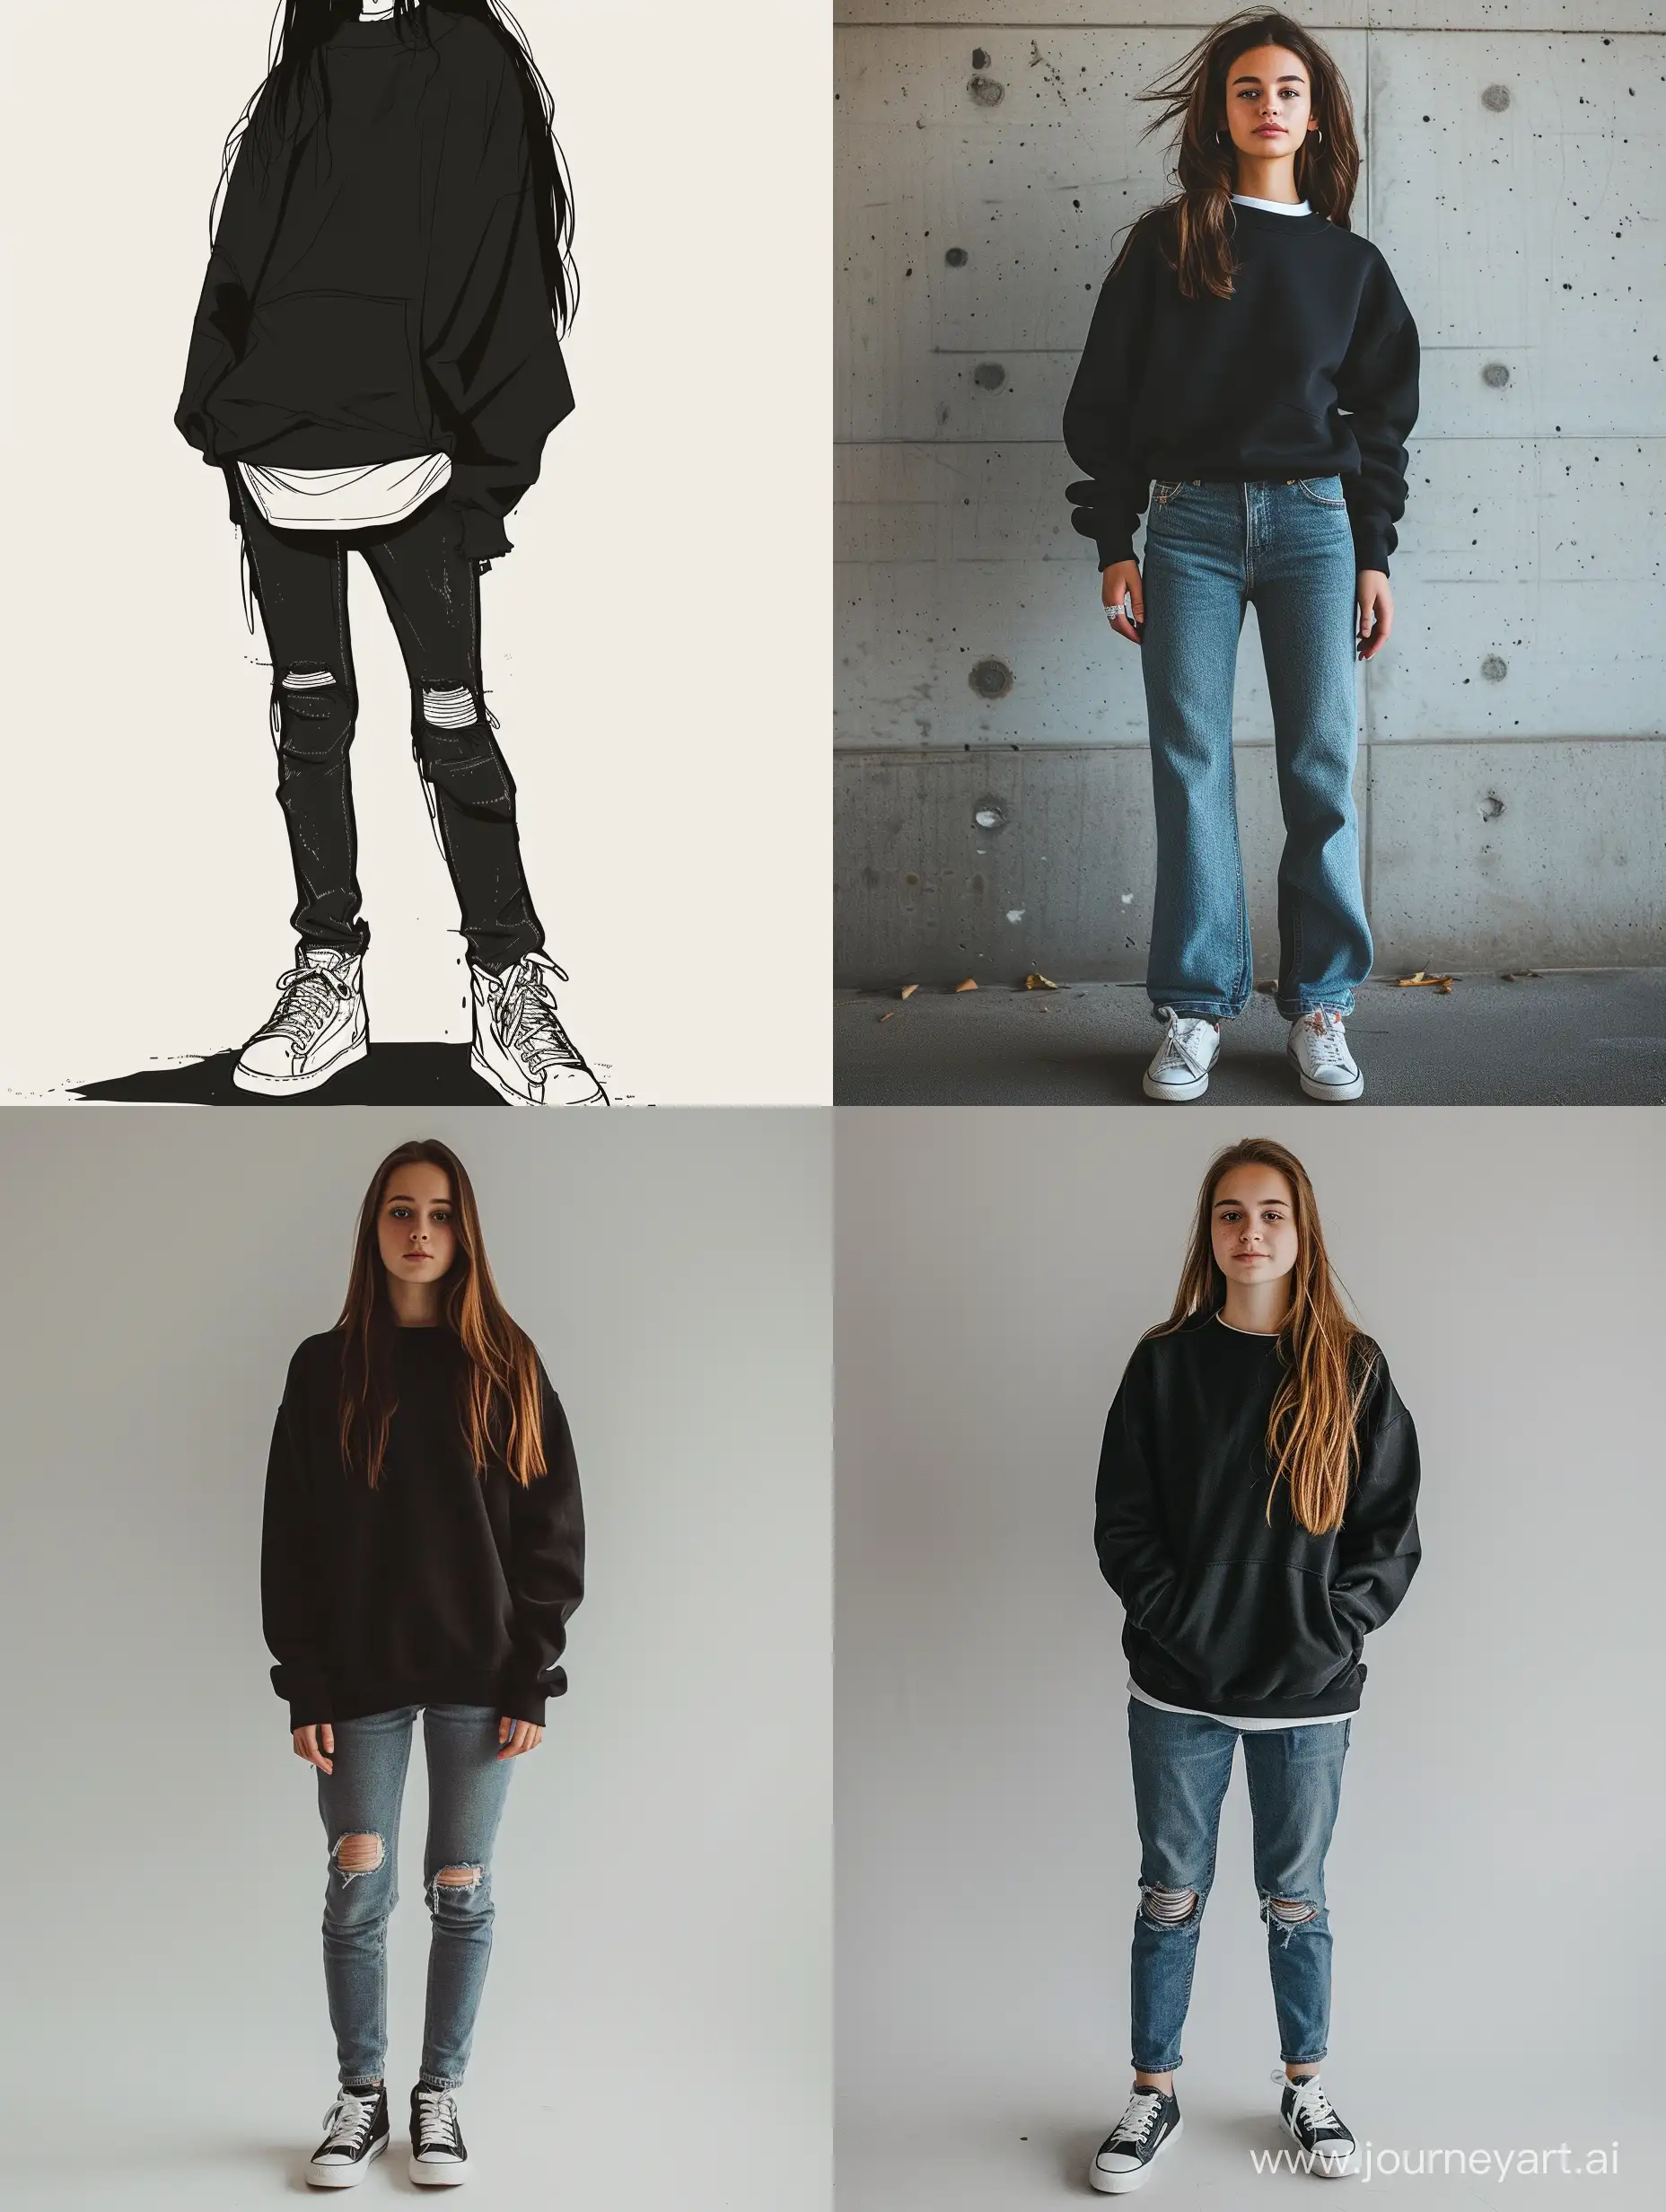 Young-Woman-Standing-Tall-in-Stylish-Black-Sweatshirt-and-Jeans